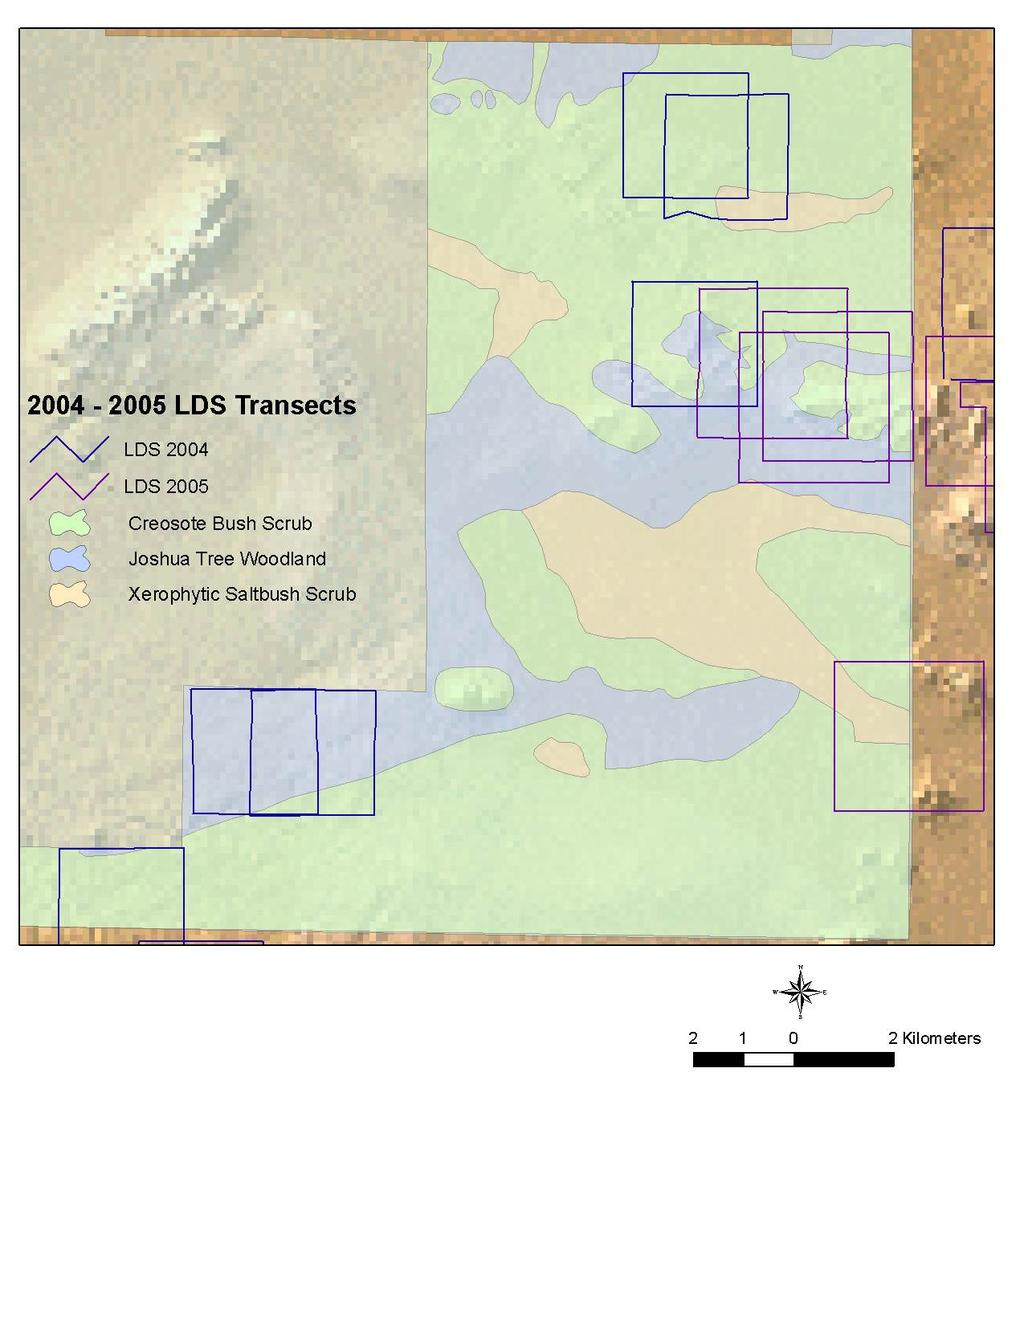 Figure 9. LDS transects in 2004 and 2005 changed from the bow-tie to large squares. Their location on the PIRA also changed.